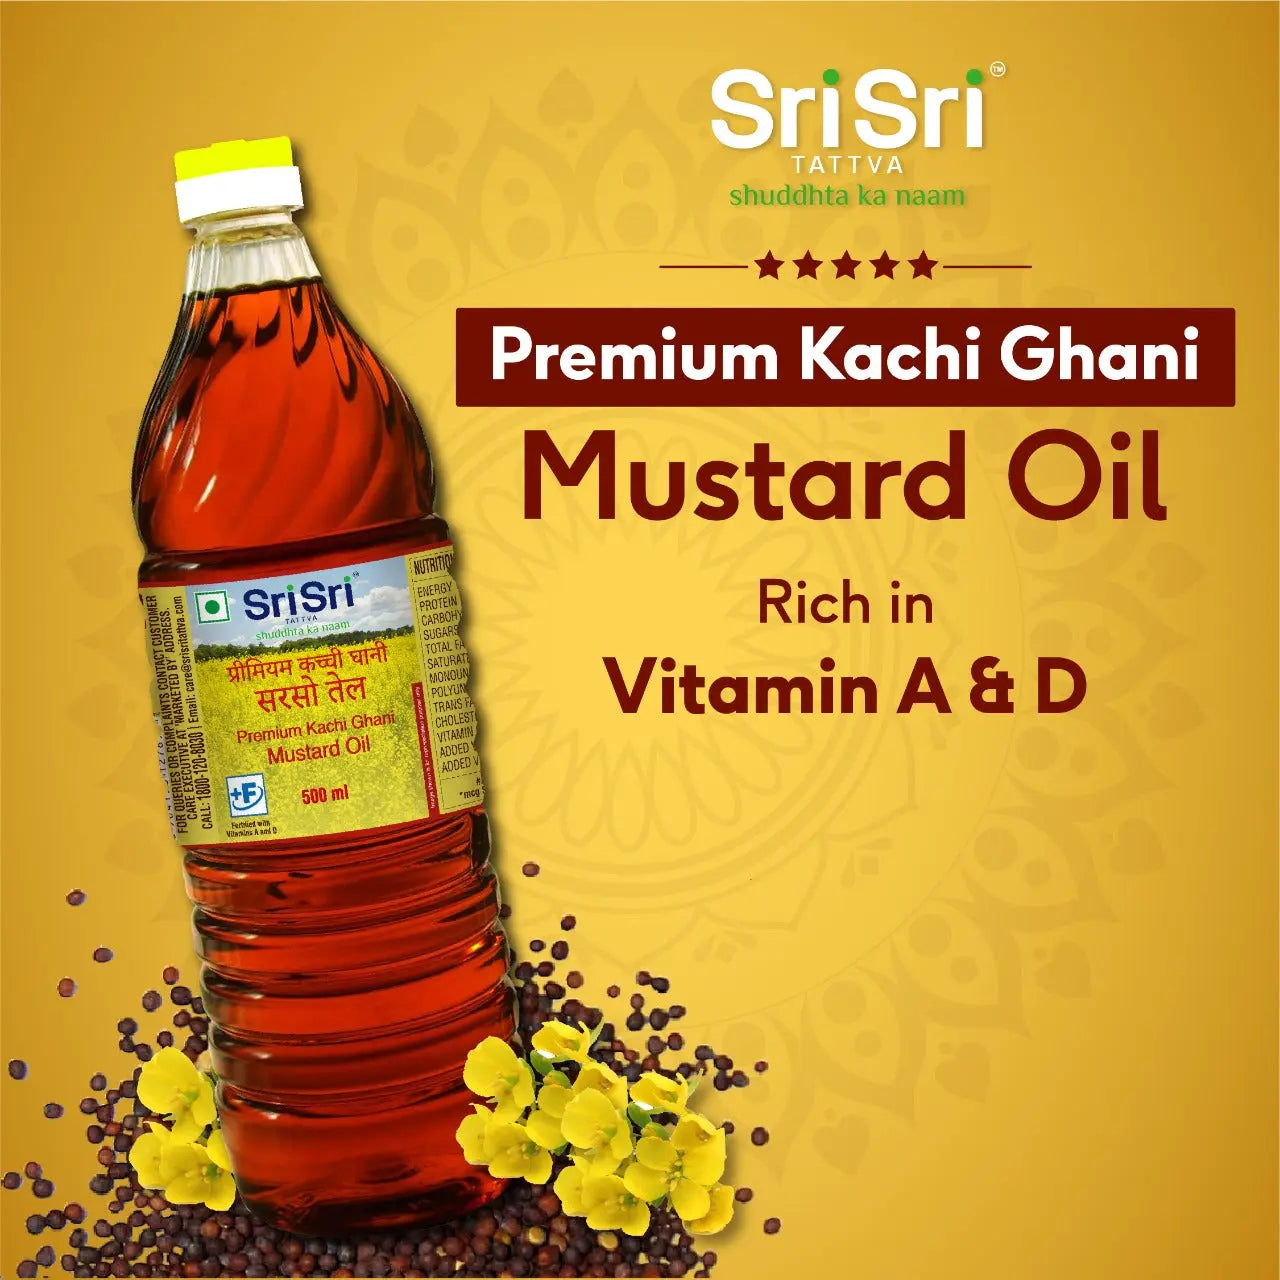 Patanjali Kachi Ghani Mustard Oil 1L (Pack of 3) Unique : Amazon.in:  Grocery & Gourmet Foods